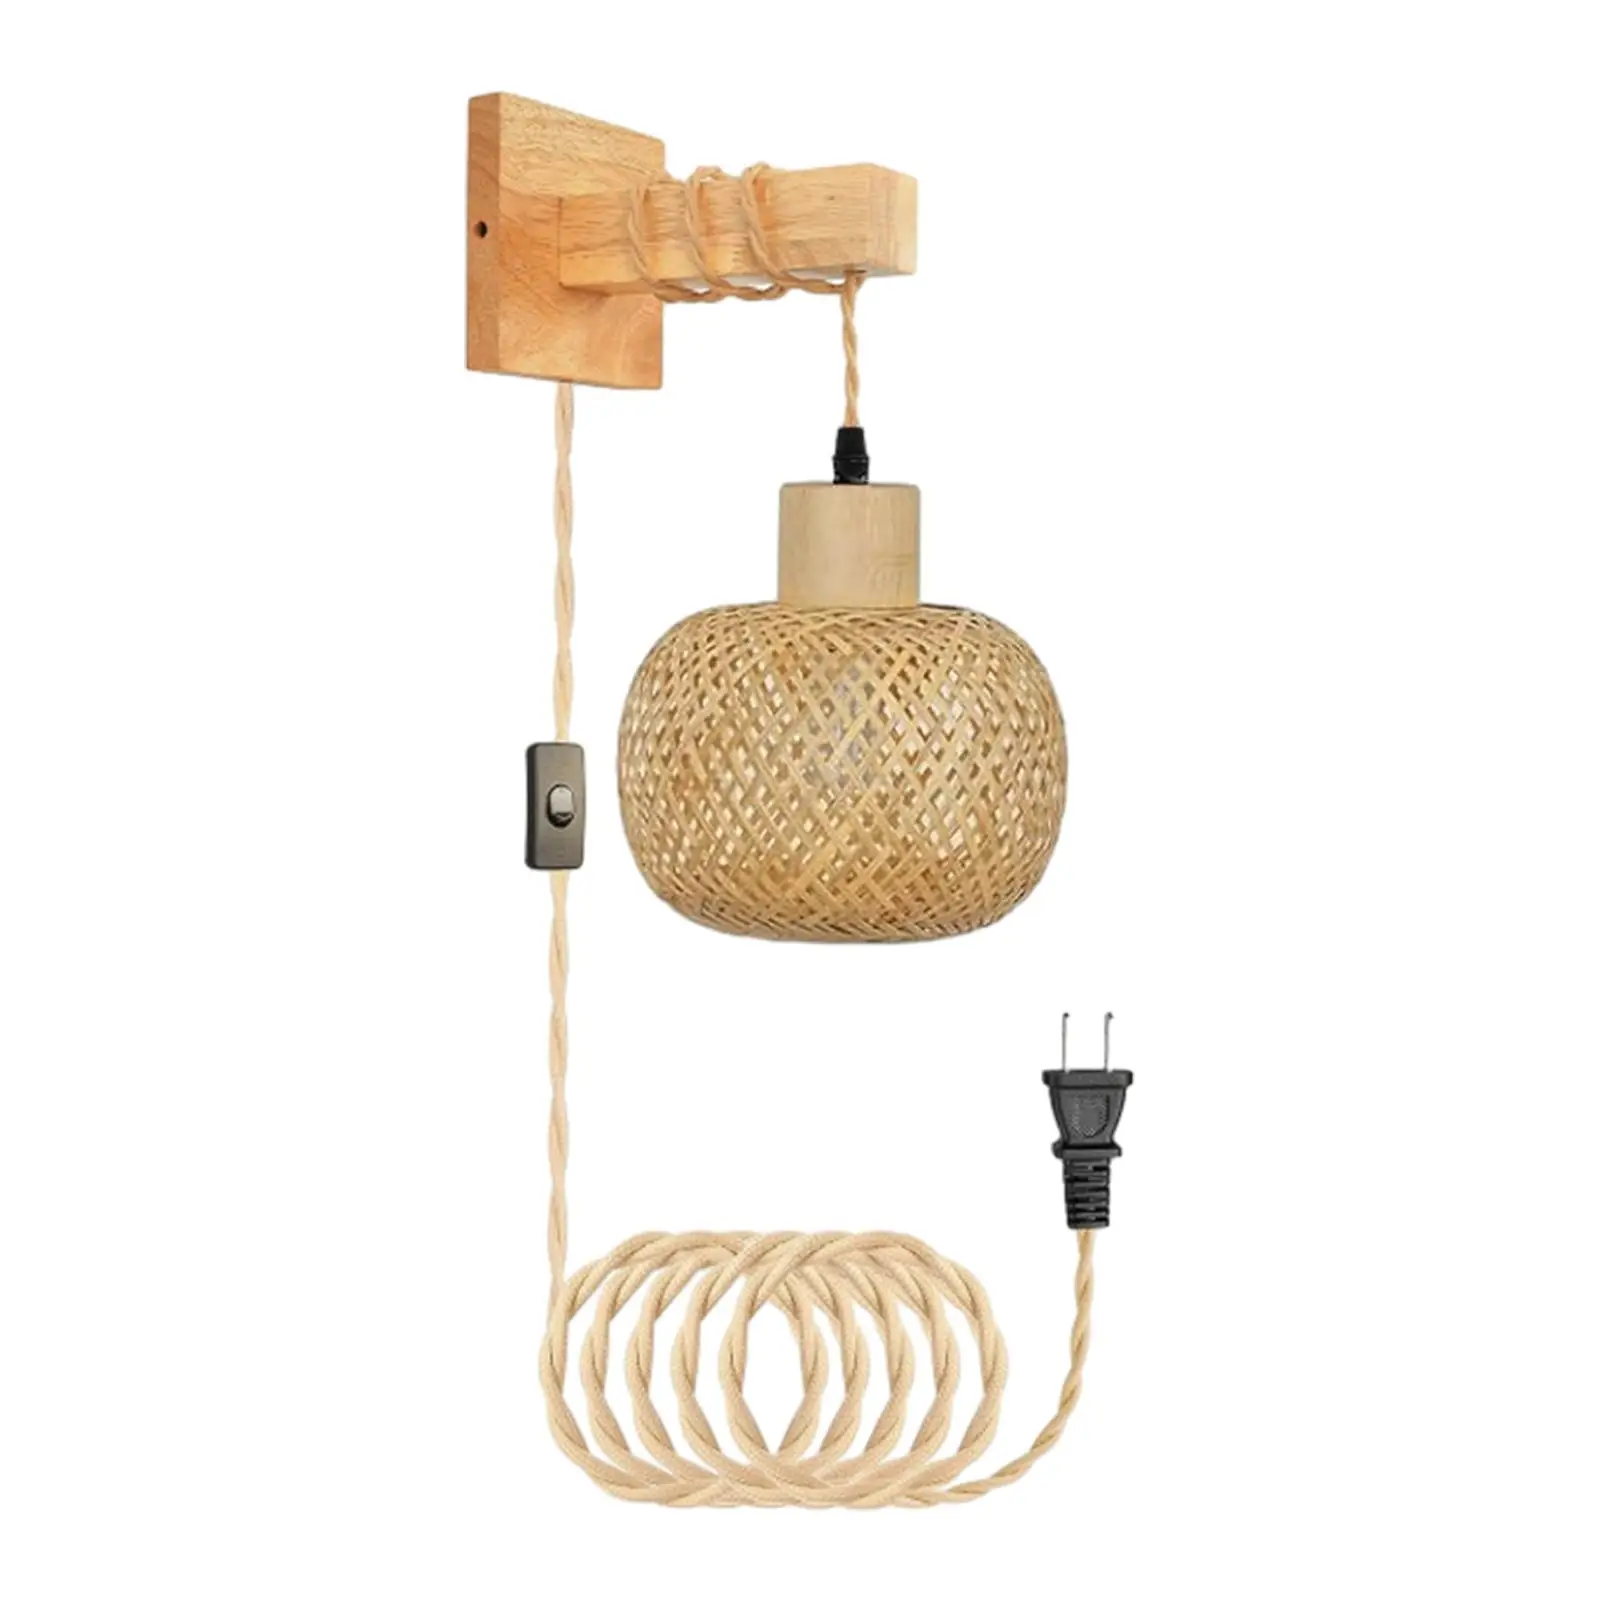 Bamboo Wall Sconce Decorative Bedside Light Fixture Farmhouse Hanging Lamp for Reading Farmhouse Bathroom Home Living Room